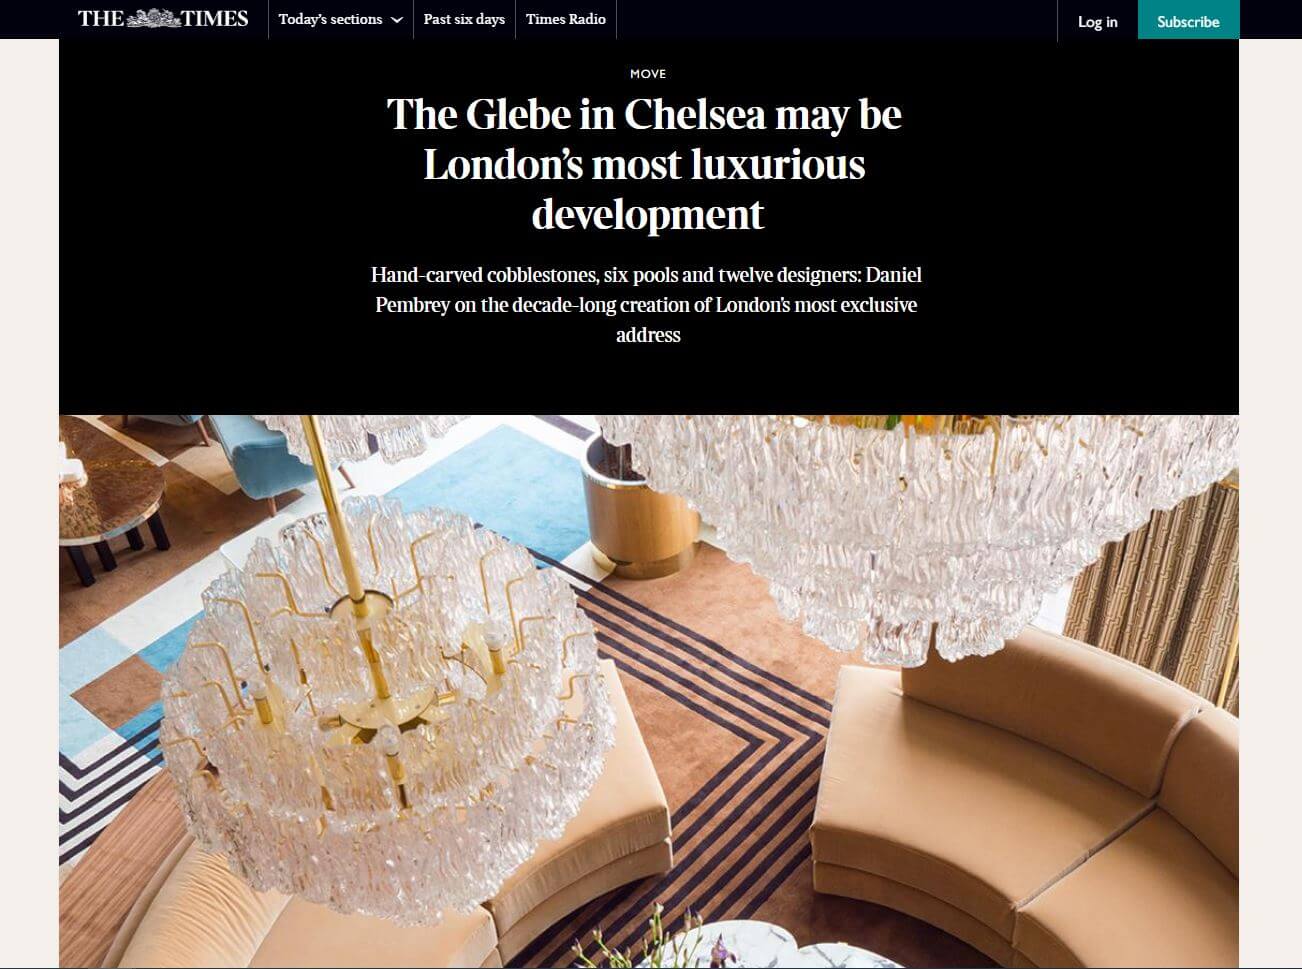 Szerelmey Project Making Headlines in the Times & the Architectural Digest - Szerelmey